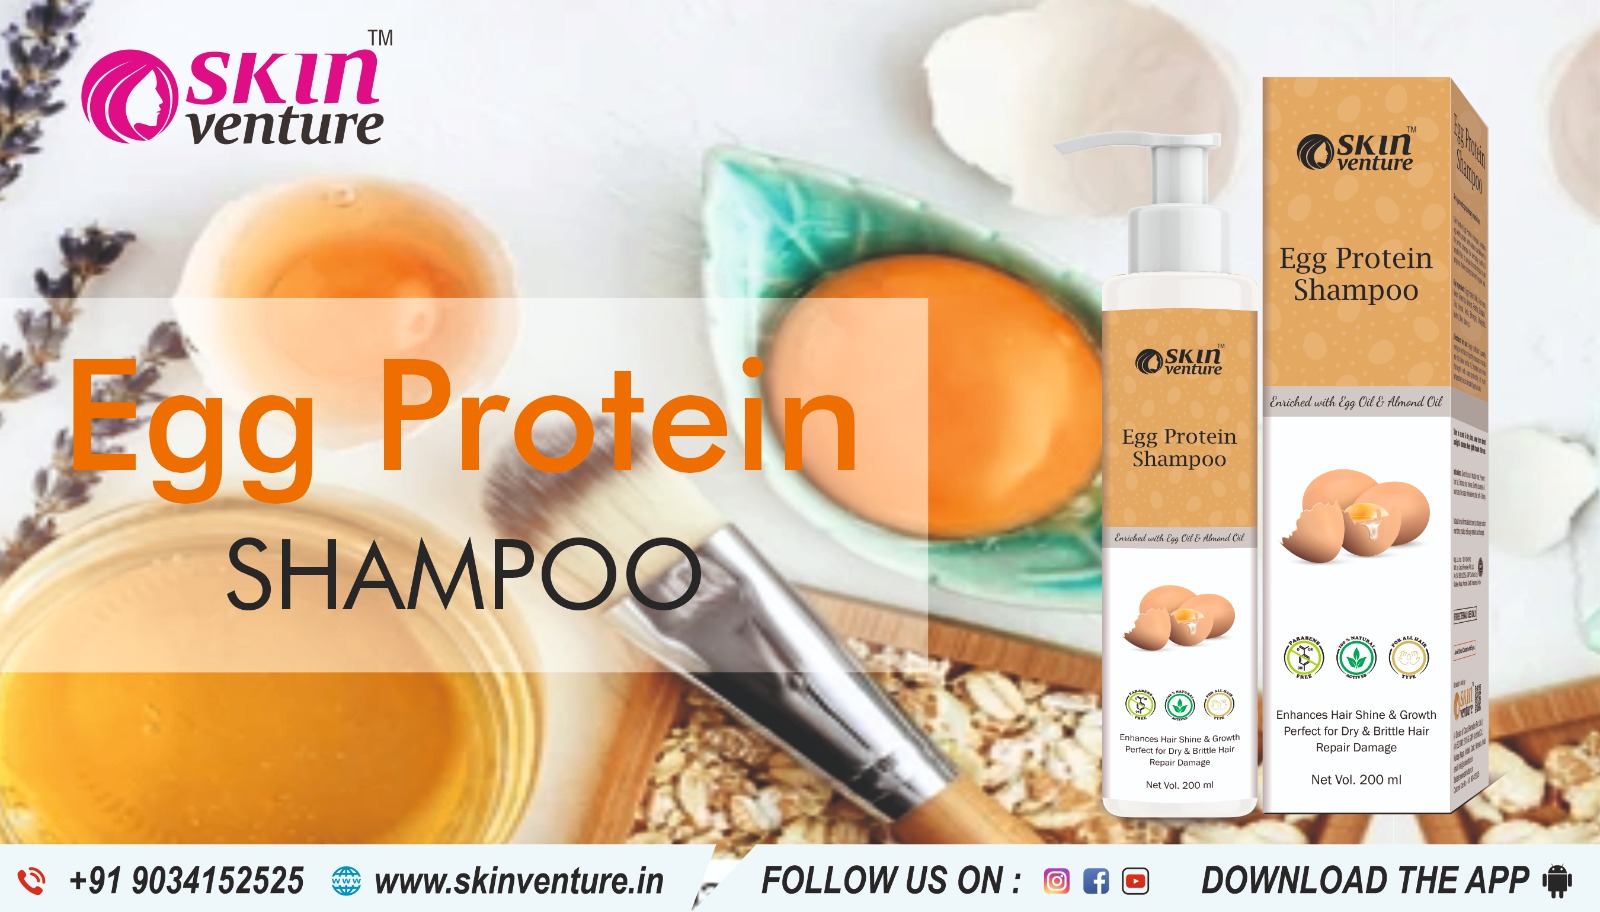 Cosmetics PCD Franchise for Egg Protein Shampoo